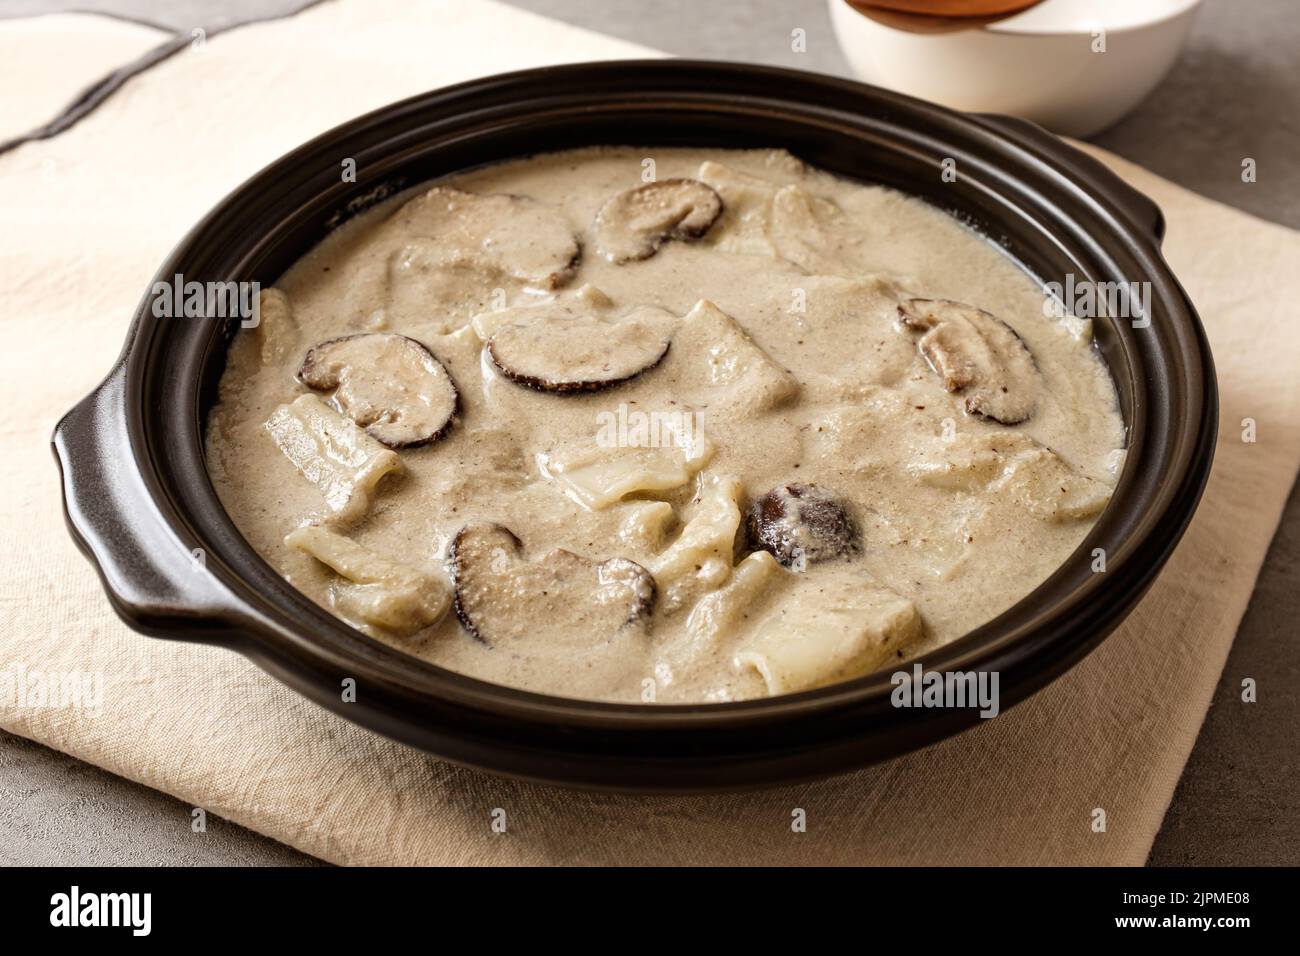 broth made from perilla. A dish made from thinly spread dough. Korean food culture Stock Photo